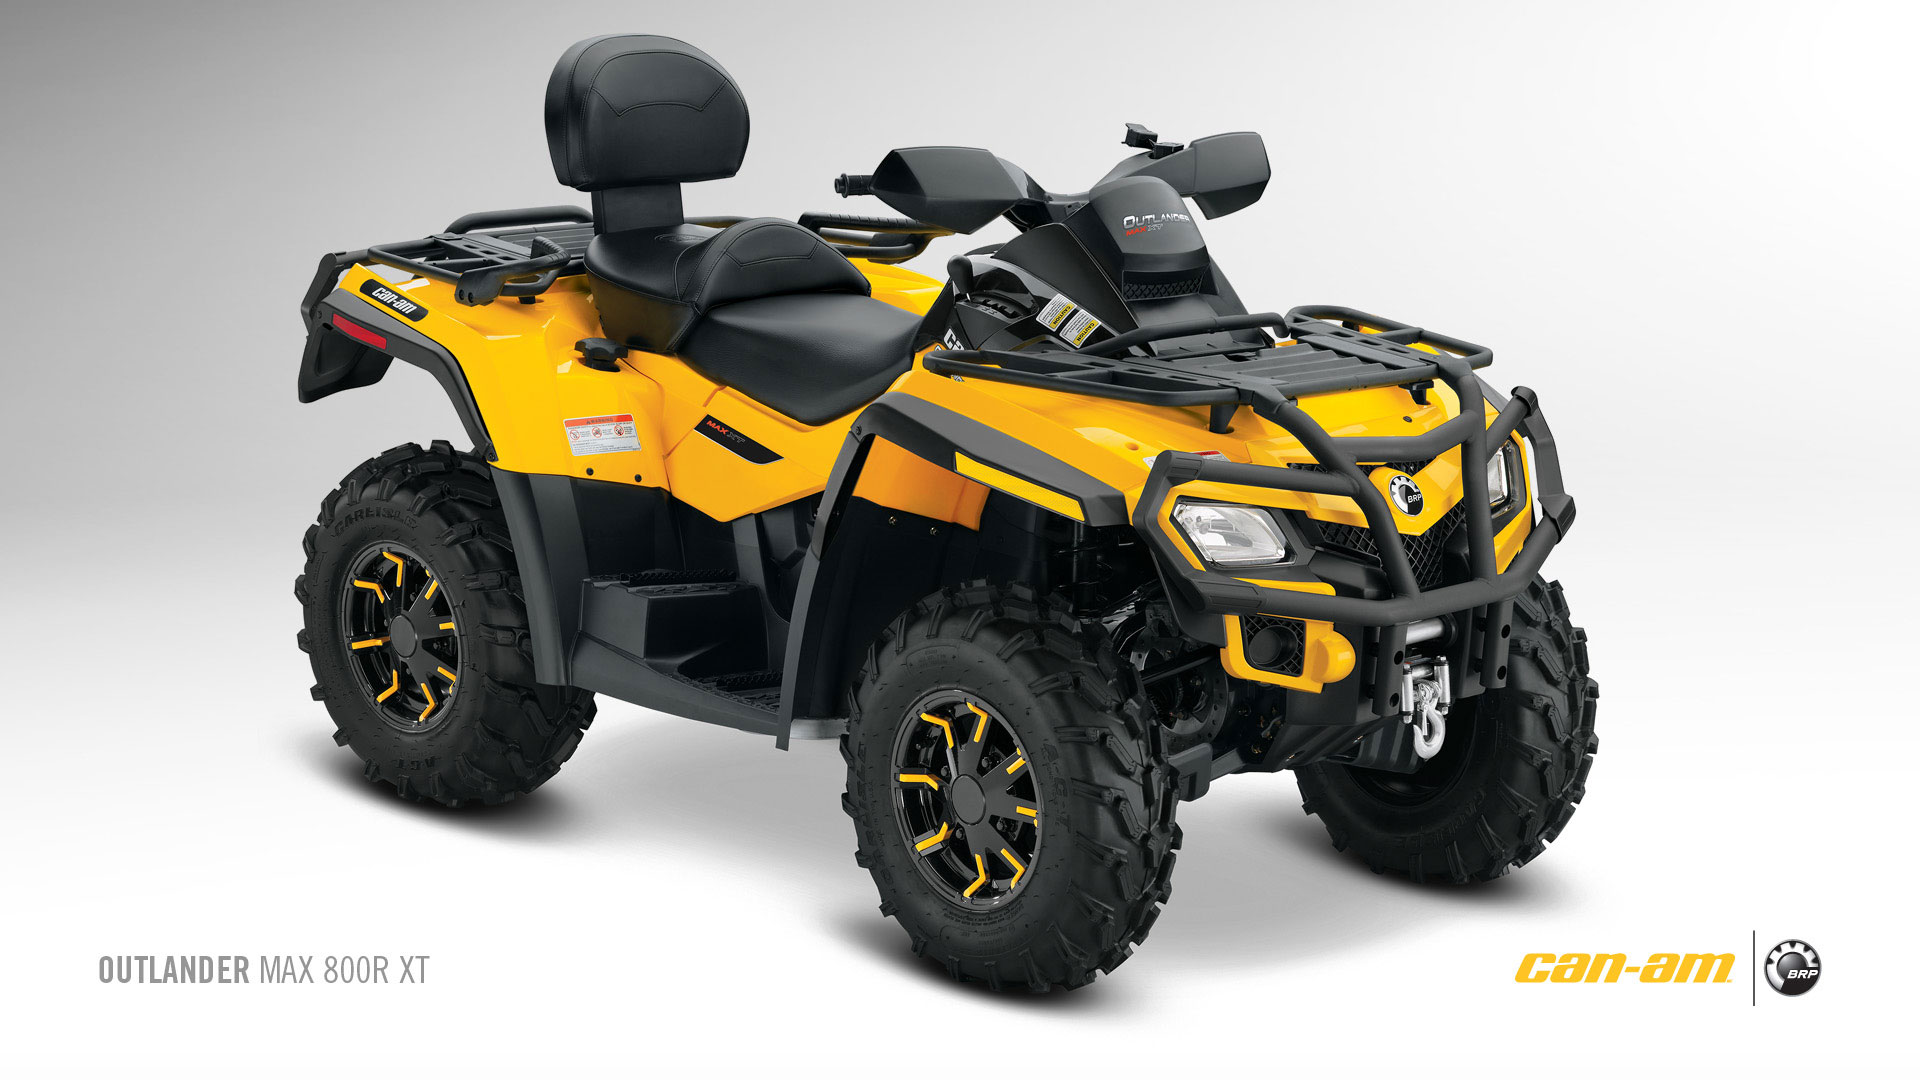 2012 Can-Am Outlander 800R XT ATV pictures, specifications